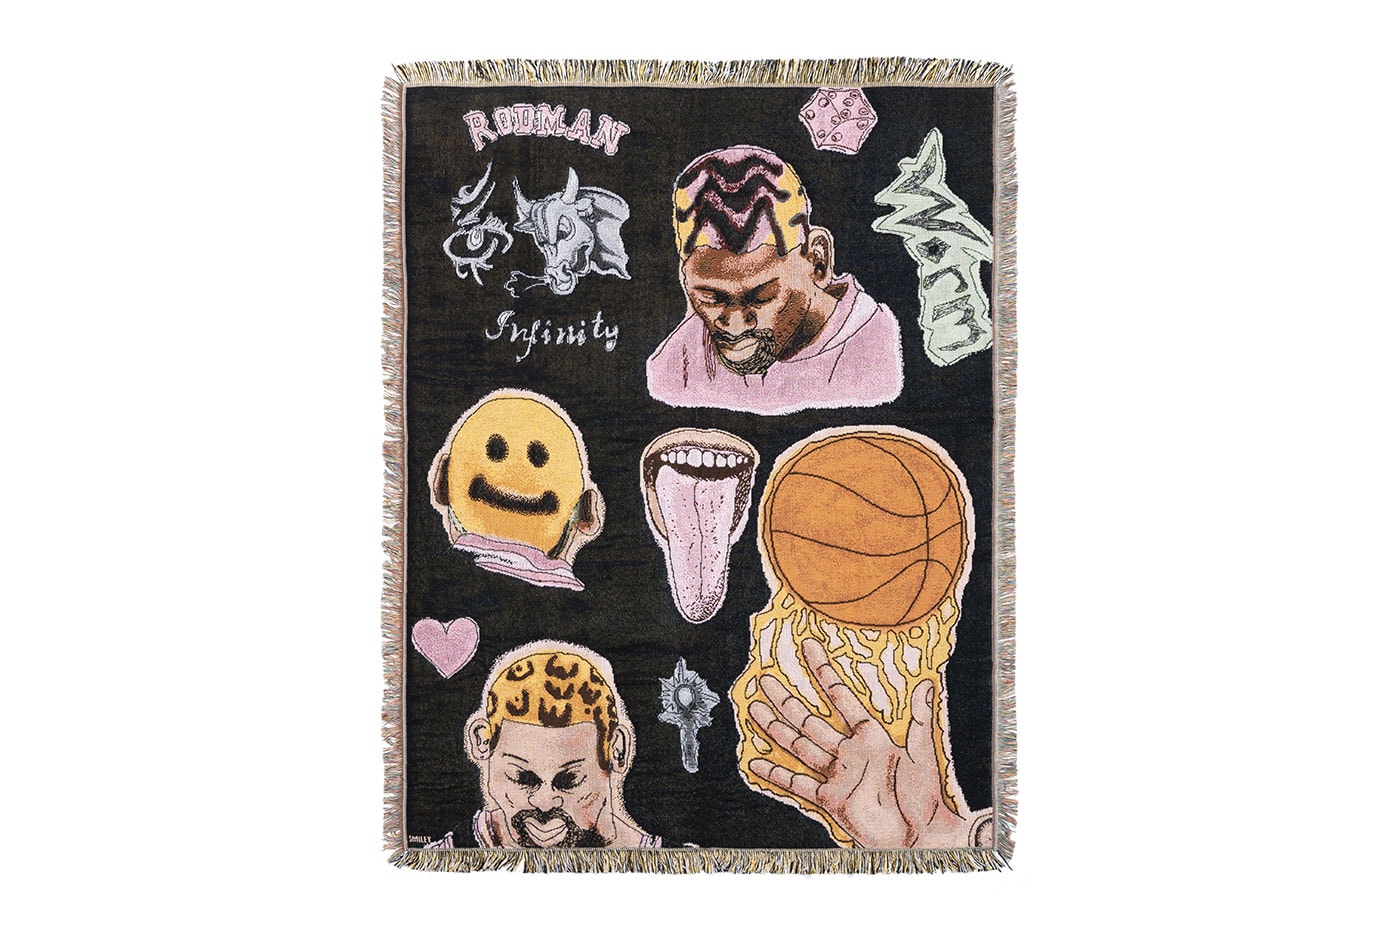 MA®KET Launches a Dennis Rodman Collection pink leopard print hoodies and shorts,  photoshoot tees, poster sets, jerseys bucket hats sweatpants woven blankets and Champion basketball shorts apparel home goods doodles pillows smiley face bridal gown t shirt trucker hat release info date price